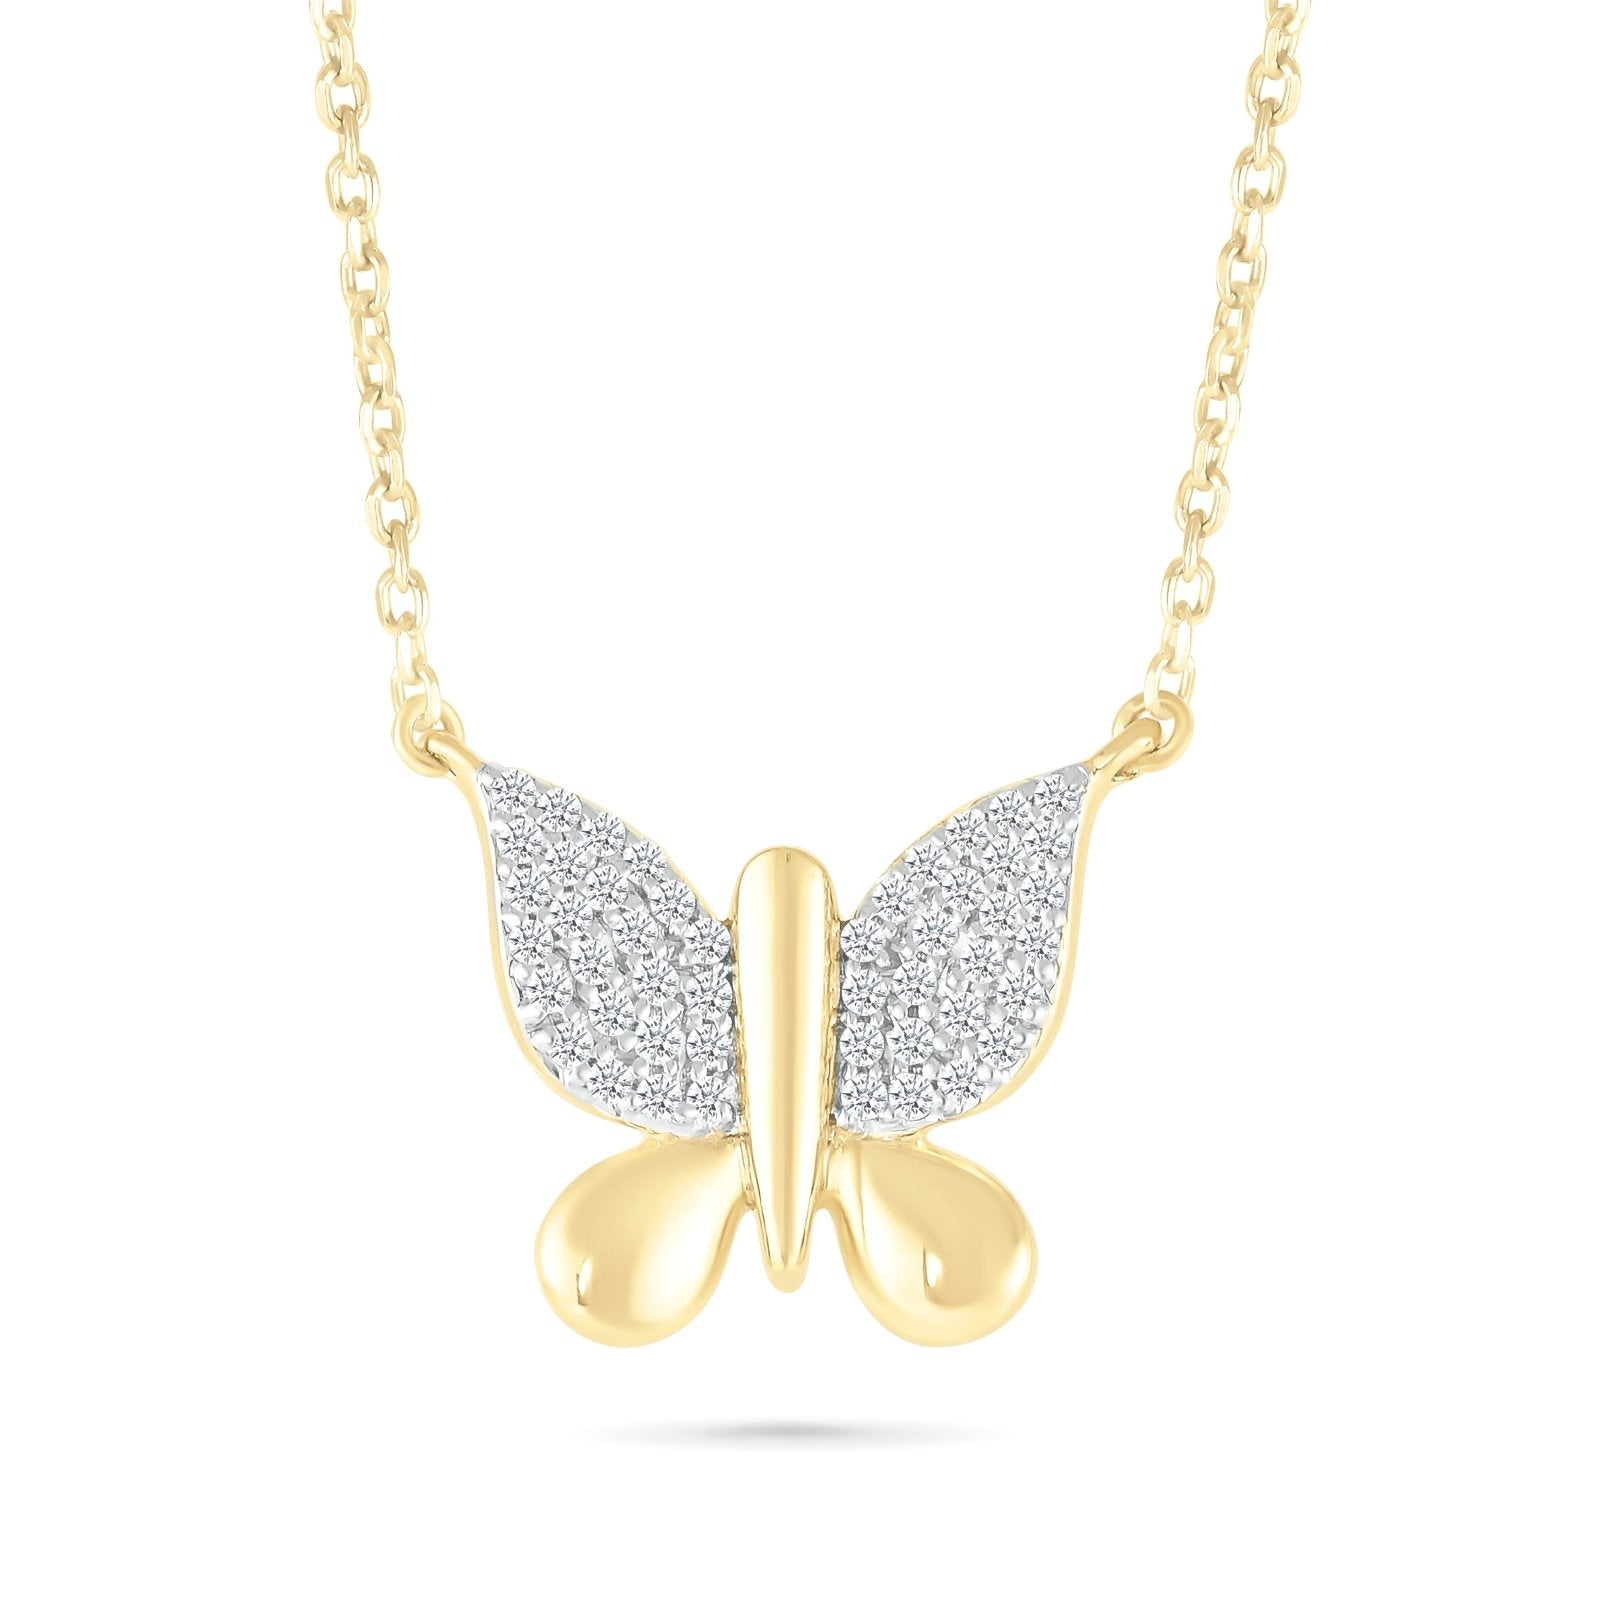 Diamond Butterfly Pendant Necklace Necklaces Estella Collection 32703 10k April Birthstone Colorless Gemstone #tag4# #tag5# #tag6# #tag7# #tag8# #tag9# #tag10#